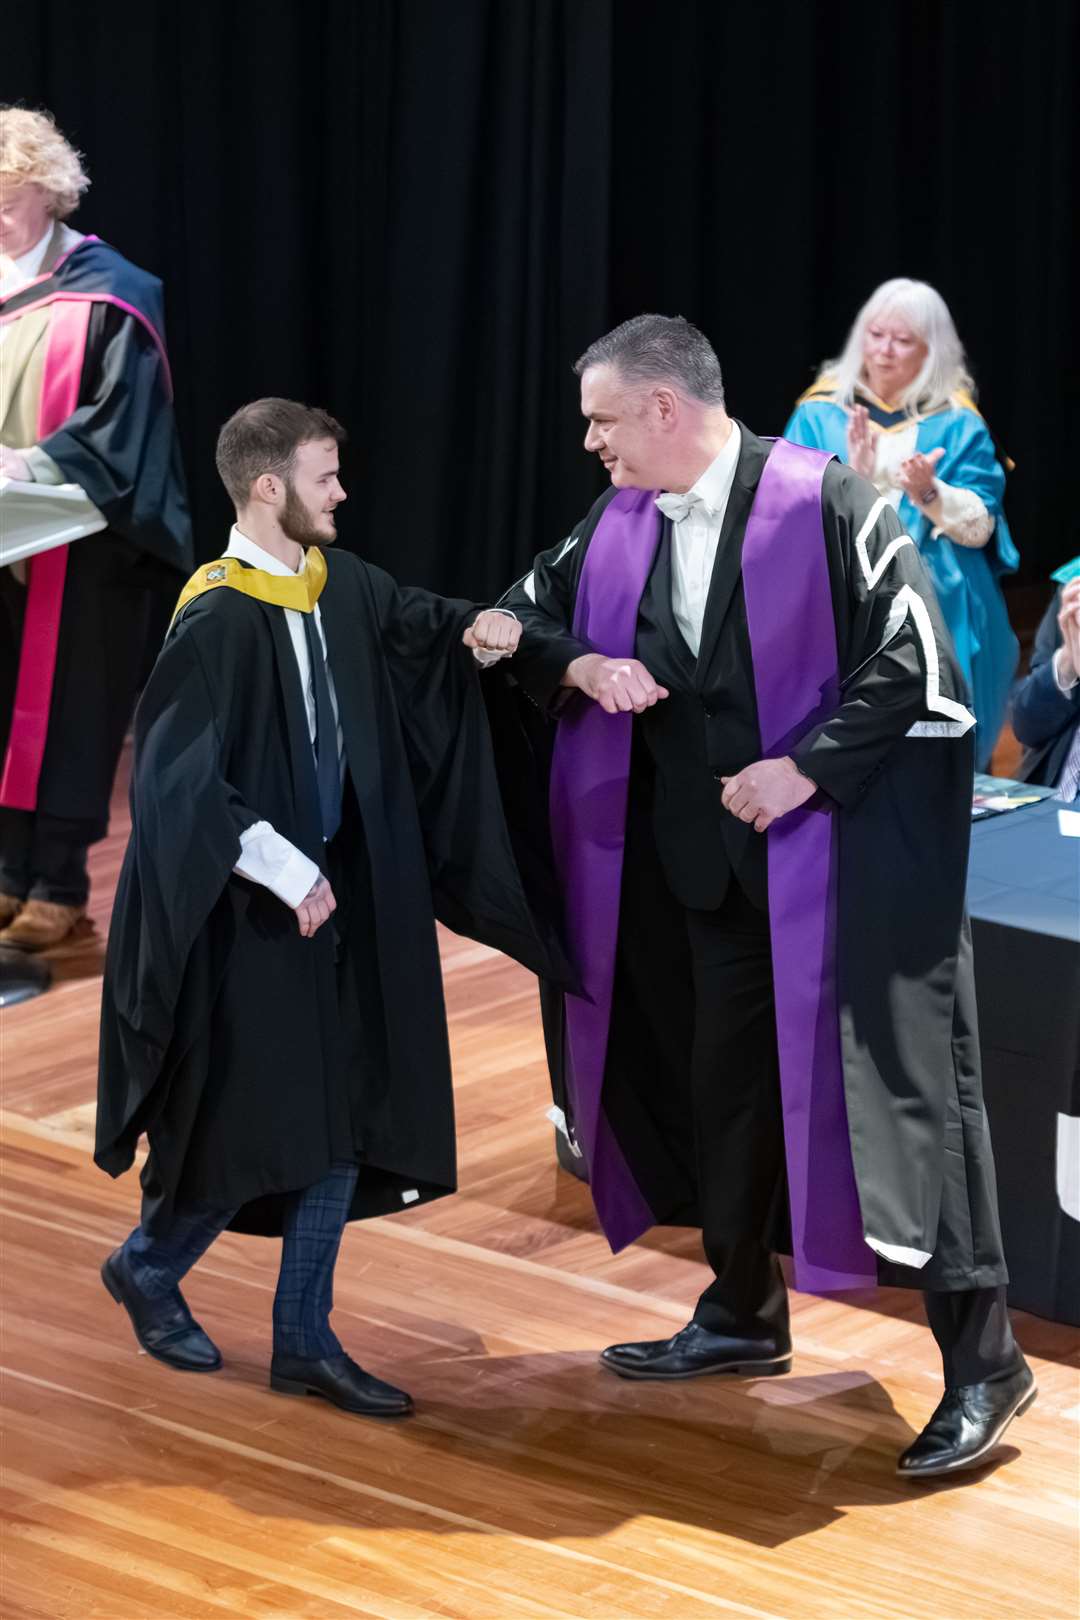 Professor Keith Smyth, Dean of Learning and Teaching, congratulating Jacob Lee Buchan. ..UHI Moray's Graduations at Elgin Town Hall...Picture: Beth Taylor.